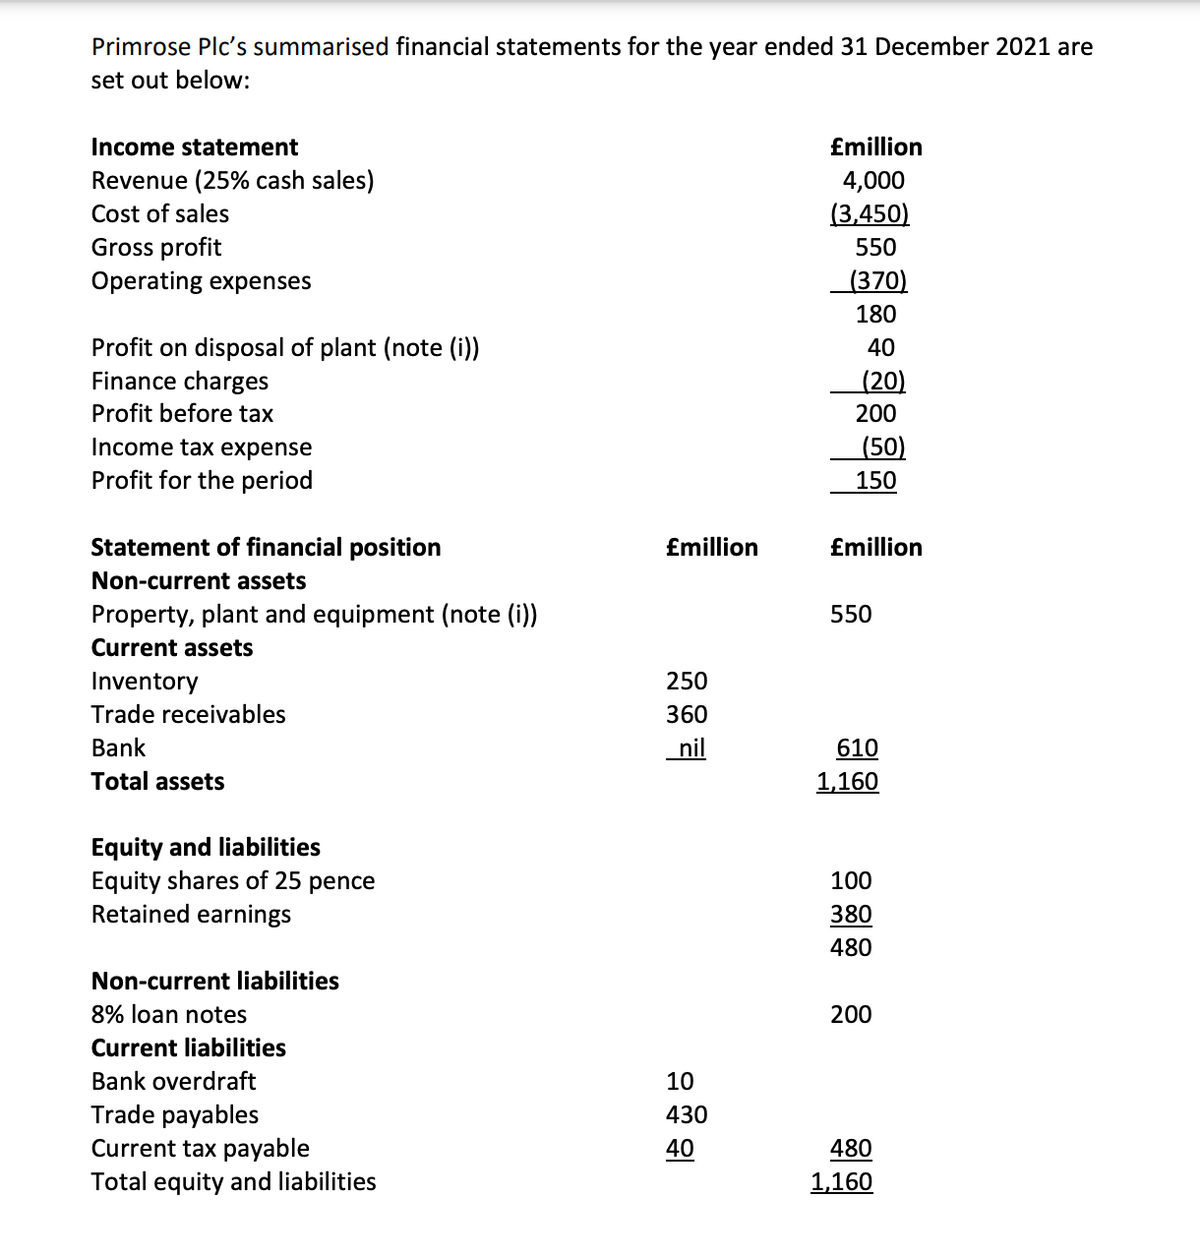 Primrose Plc's summarised financial statements for the year ended 31 December 2021 are
set out below:
Income statement
£million
Revenue (25% cash sales)
4,000
Cost of sales
(3,450)
Gross profit
550
Operating expenses
(370)
180
Profit on disposal of plant (note (i))
40
Finance charges
(20)
Profit before tax
Income tax expense
Profit for the period
Statement of financial position
Non-current assets
Property, plant and equipment (note (i))
Current assets
Inventory
Trade receivables
Bank
Total assets
Equity and liabilities
Equity shares of 25 pence
Retained earnings
Non-current liabilities
8% loan notes
Current liabilities
Bank overdraft
Trade payables
Current tax payable
Total equity and liabilities
£million
250
360
nil
10
430
40
200
(50)
150
£million
550
610
1,160
100
380
480
200
480
1,160